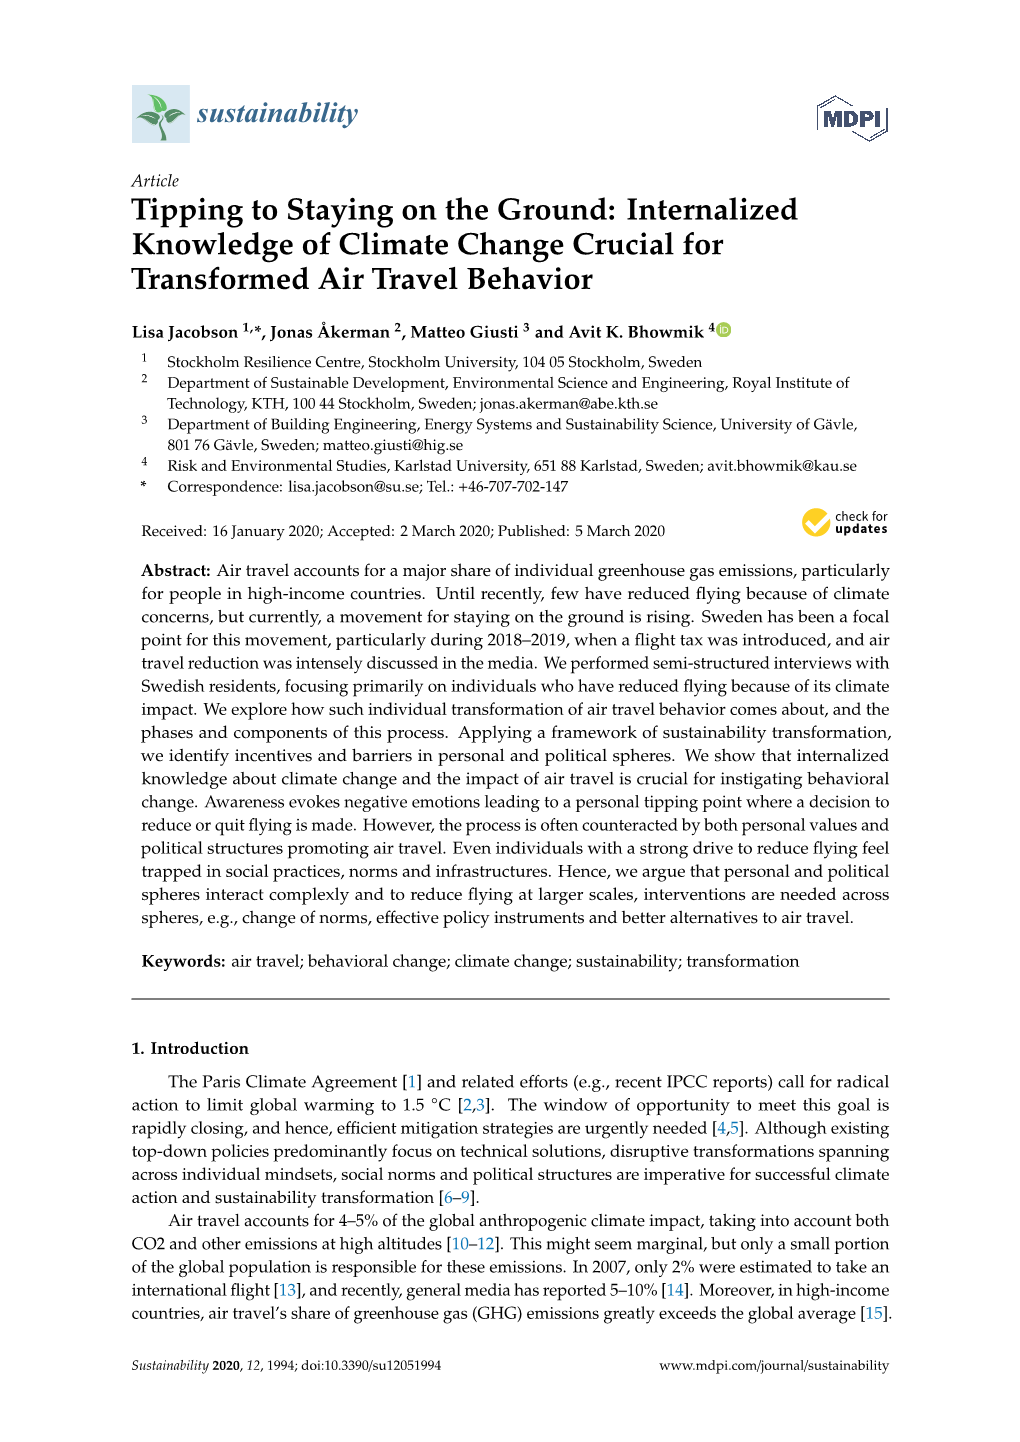 Tipping to Staying on the Ground: Internalized Knowledge of Climate Change Crucial for Transformed Air Travel Behavior